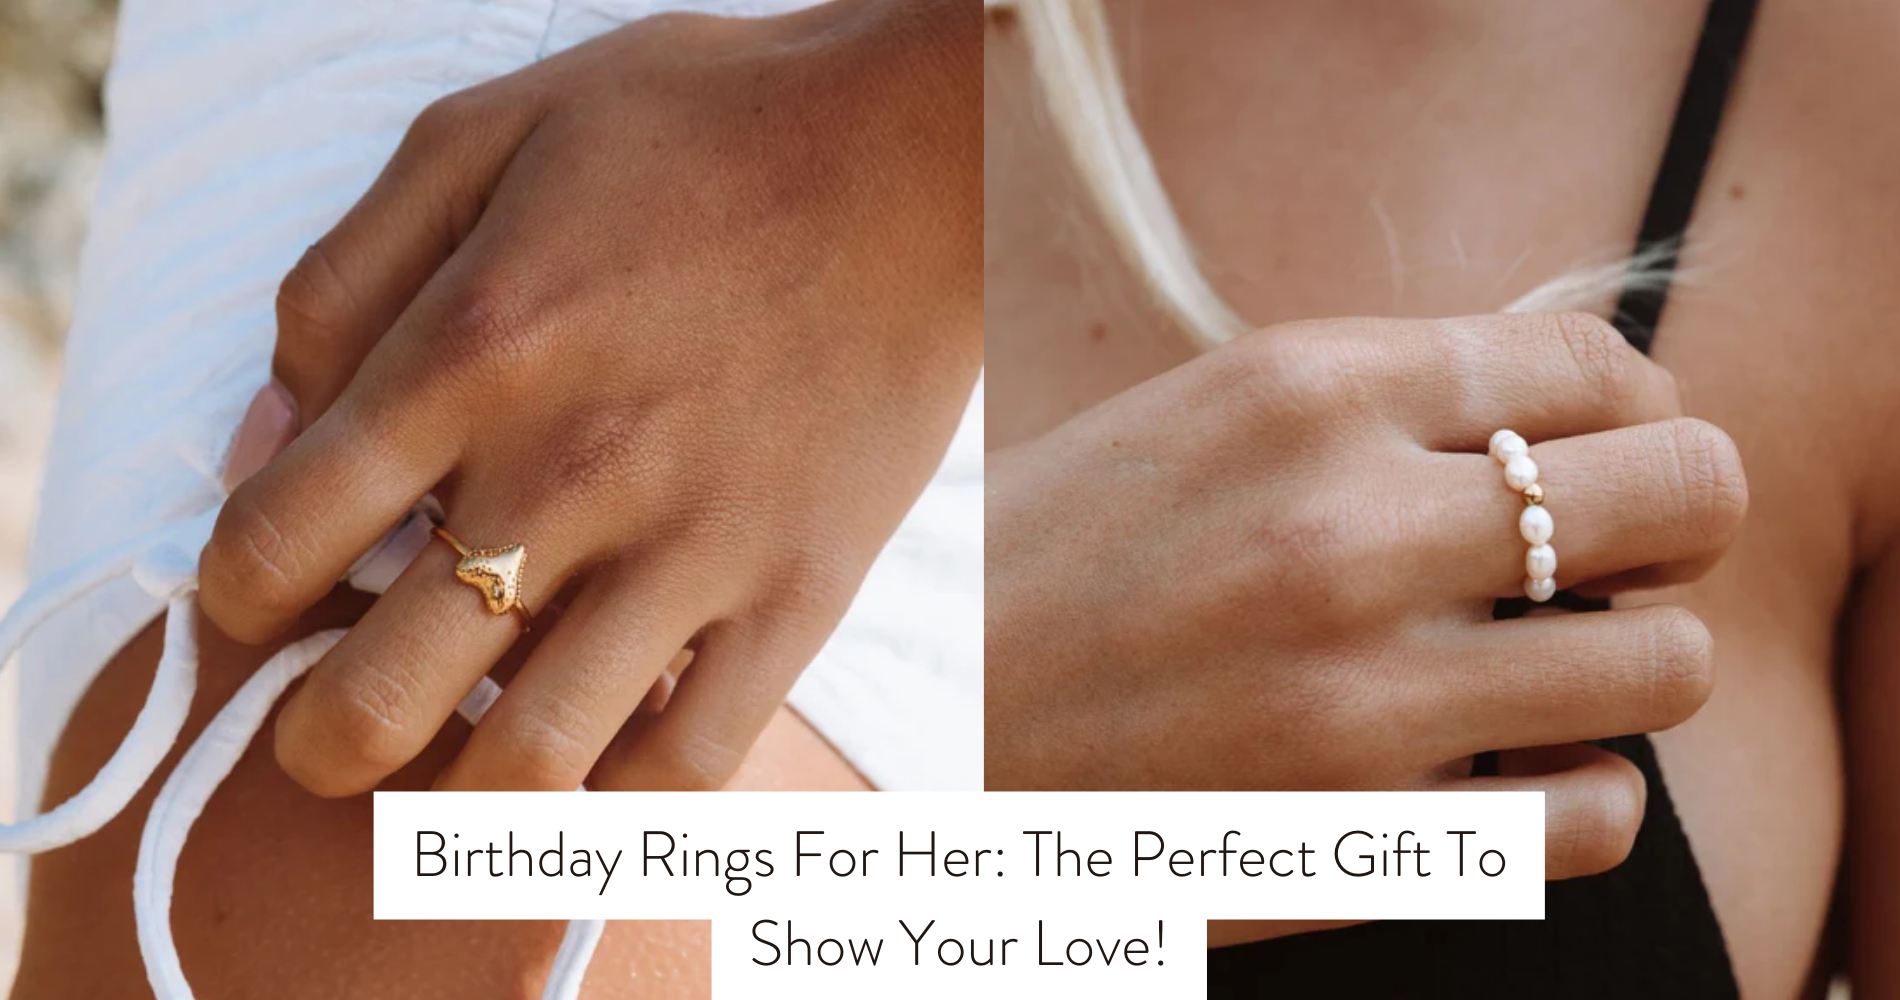 Birthday Rings For Her: The Perfect Gift To Show Your Love!